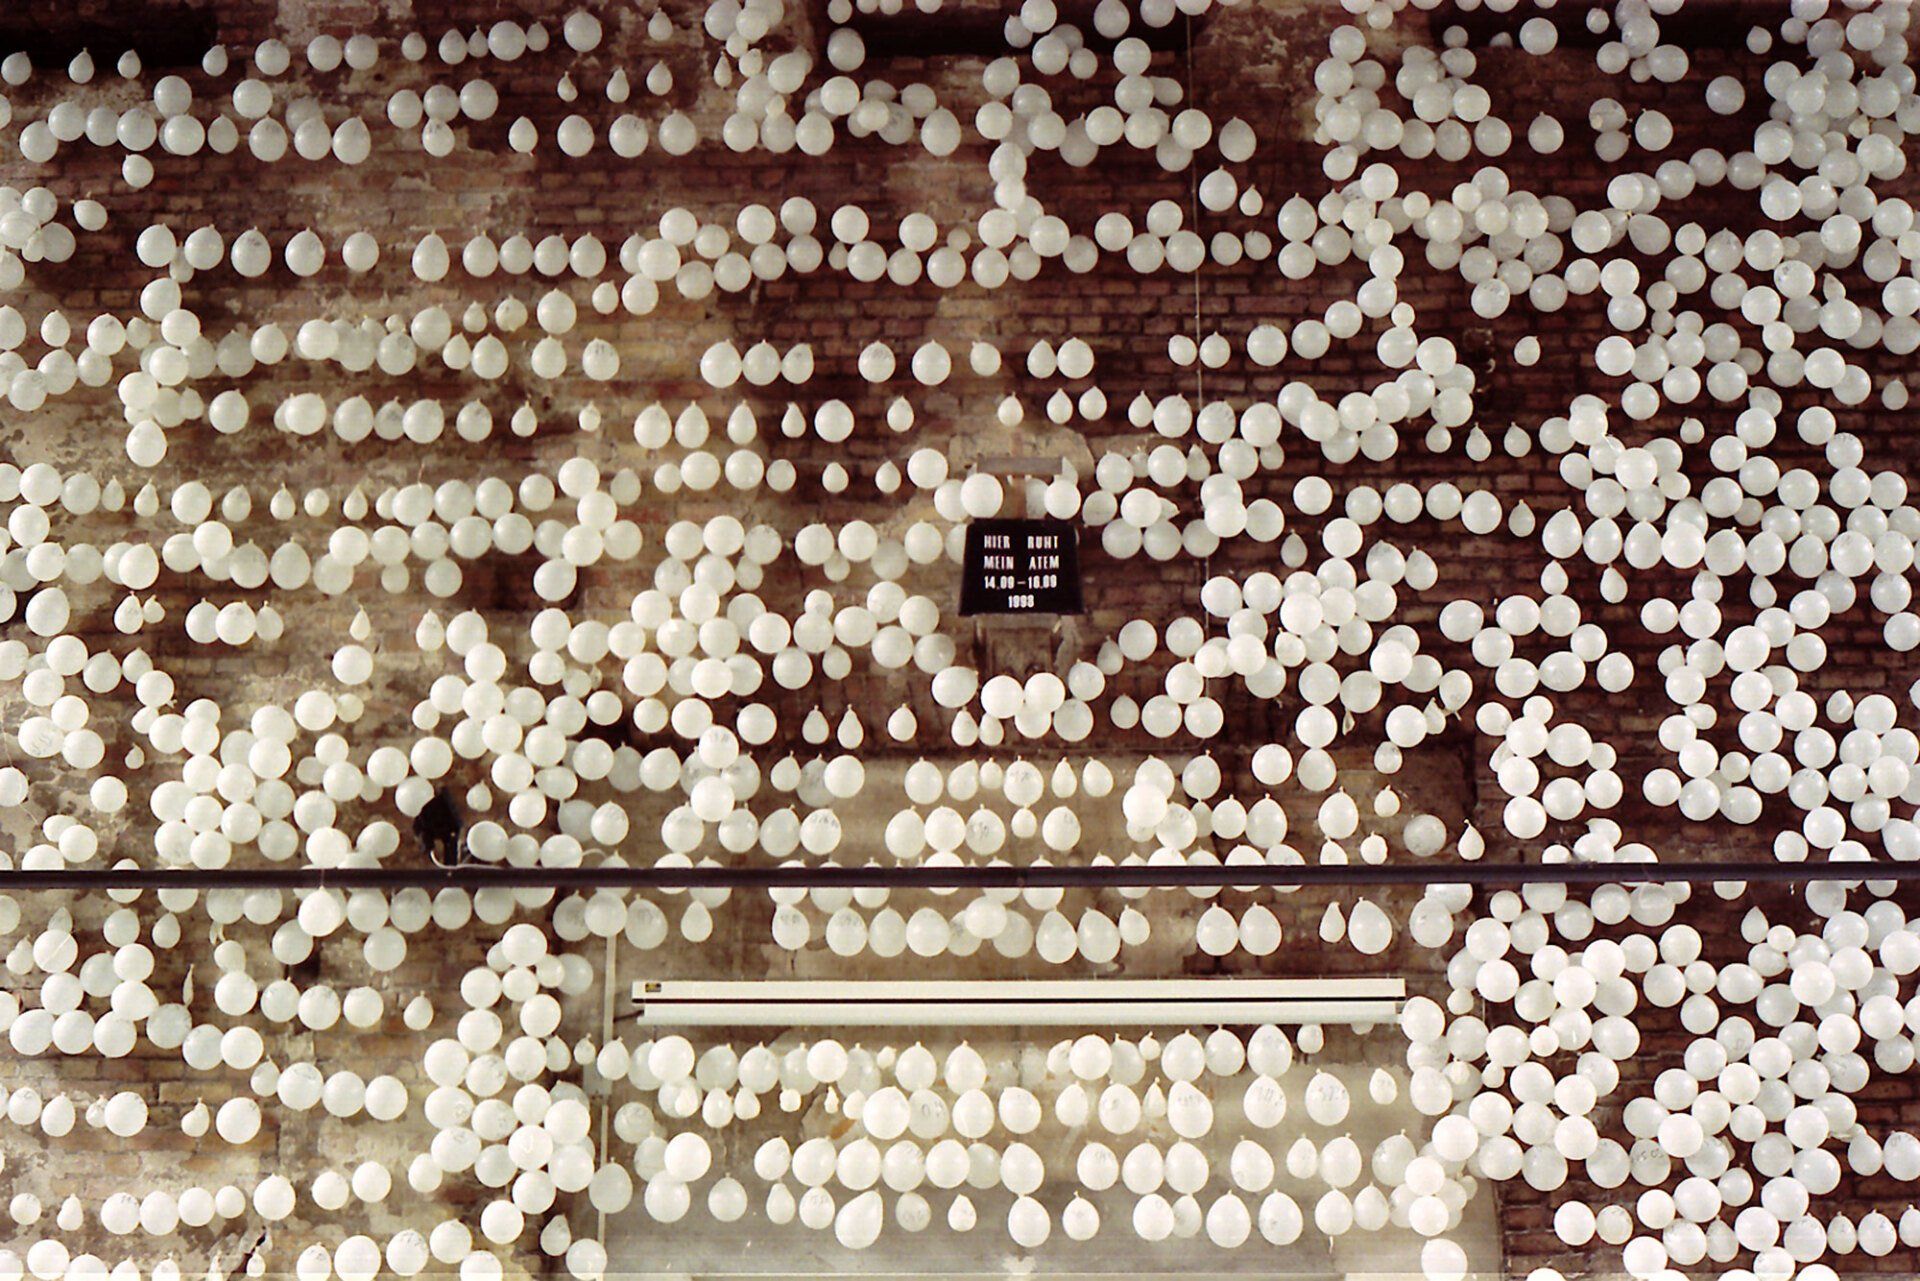 Installation. 5000 white balloons. On each of the balloons, S.Bieniek wrote down the sec., Min., Hour and date when it was inflated. Exhibited at the Museum der Charitè, Berlin (1998)